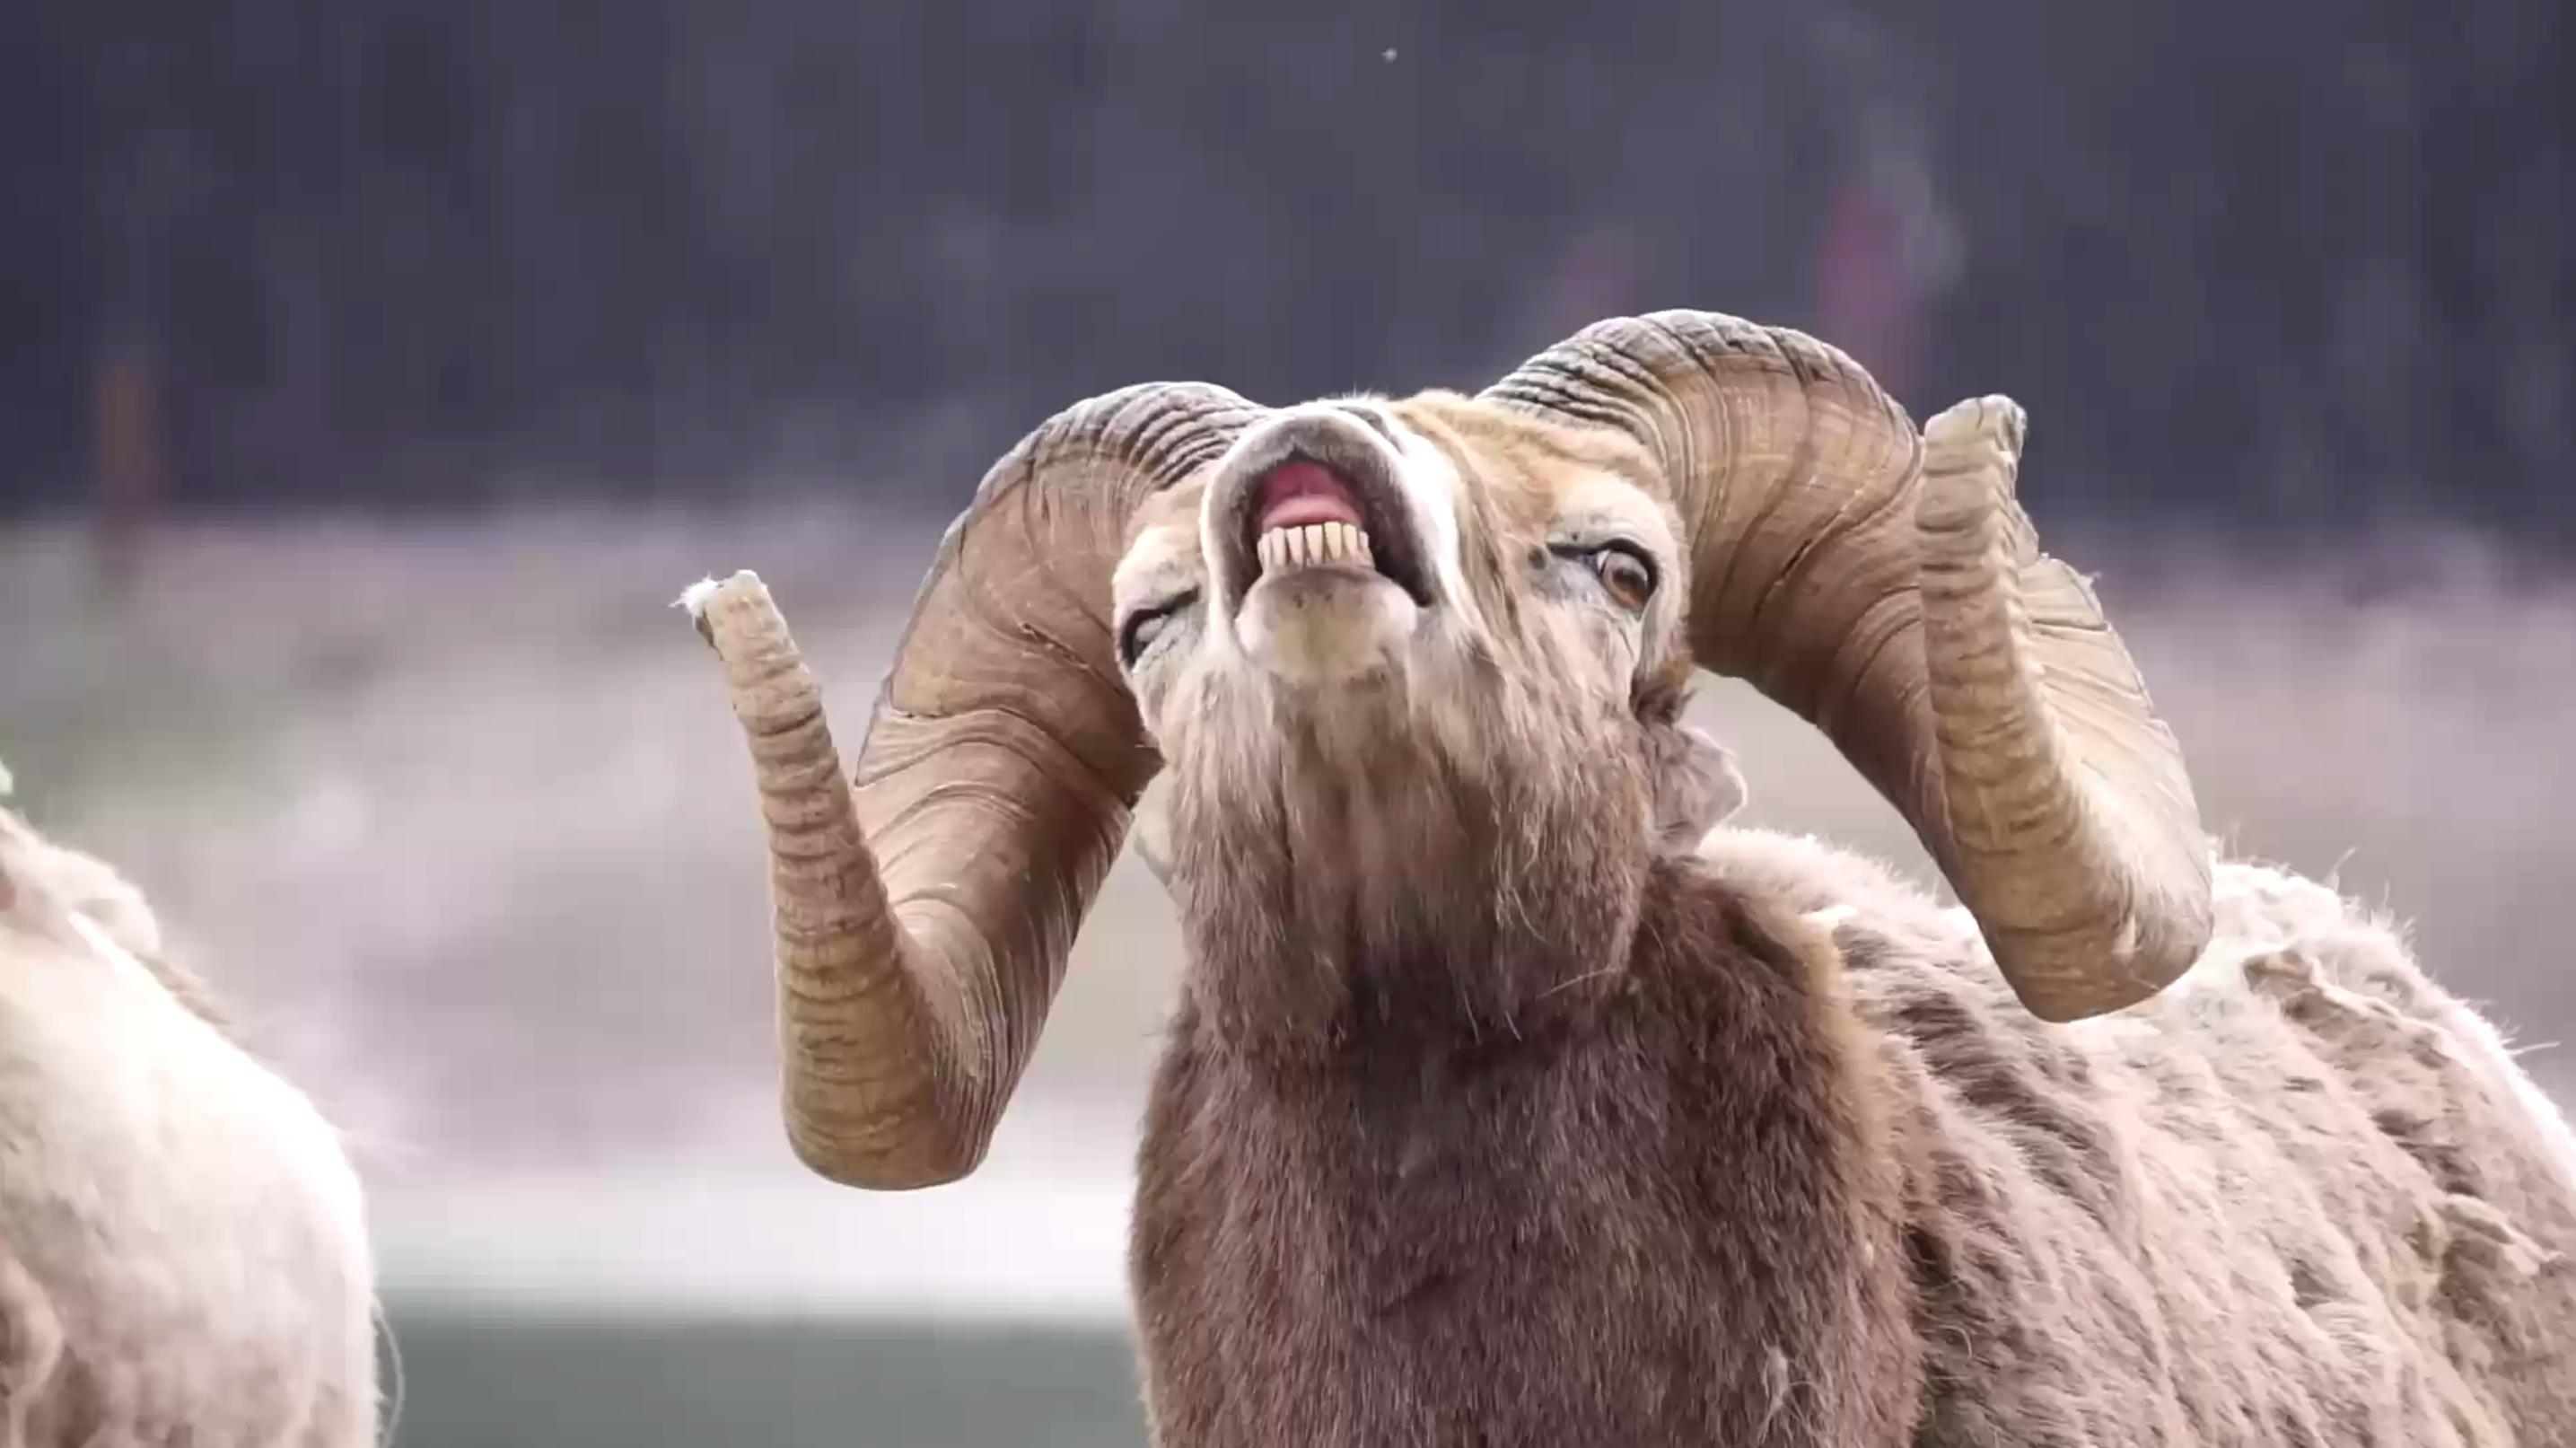 PsBattle: A head-on picture of a bighorn sheep : photoshopbattles